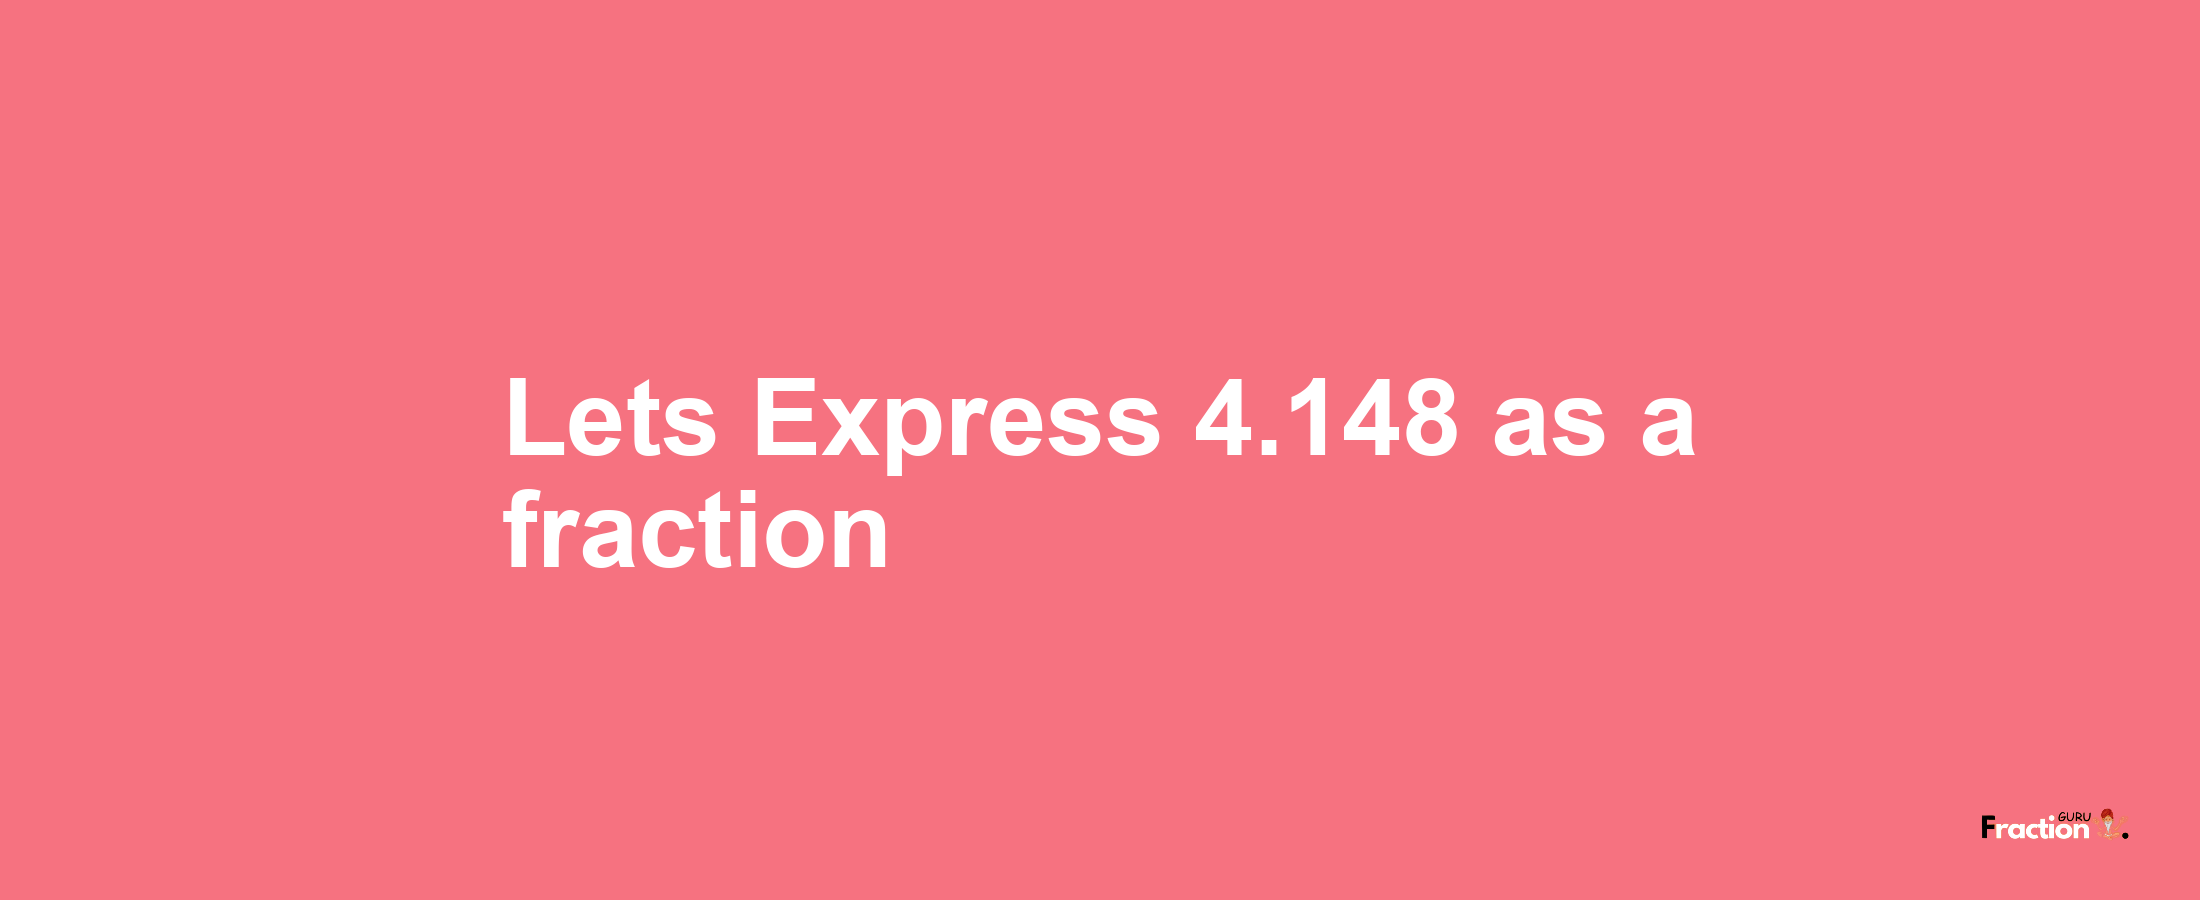 Lets Express 4.148 as afraction